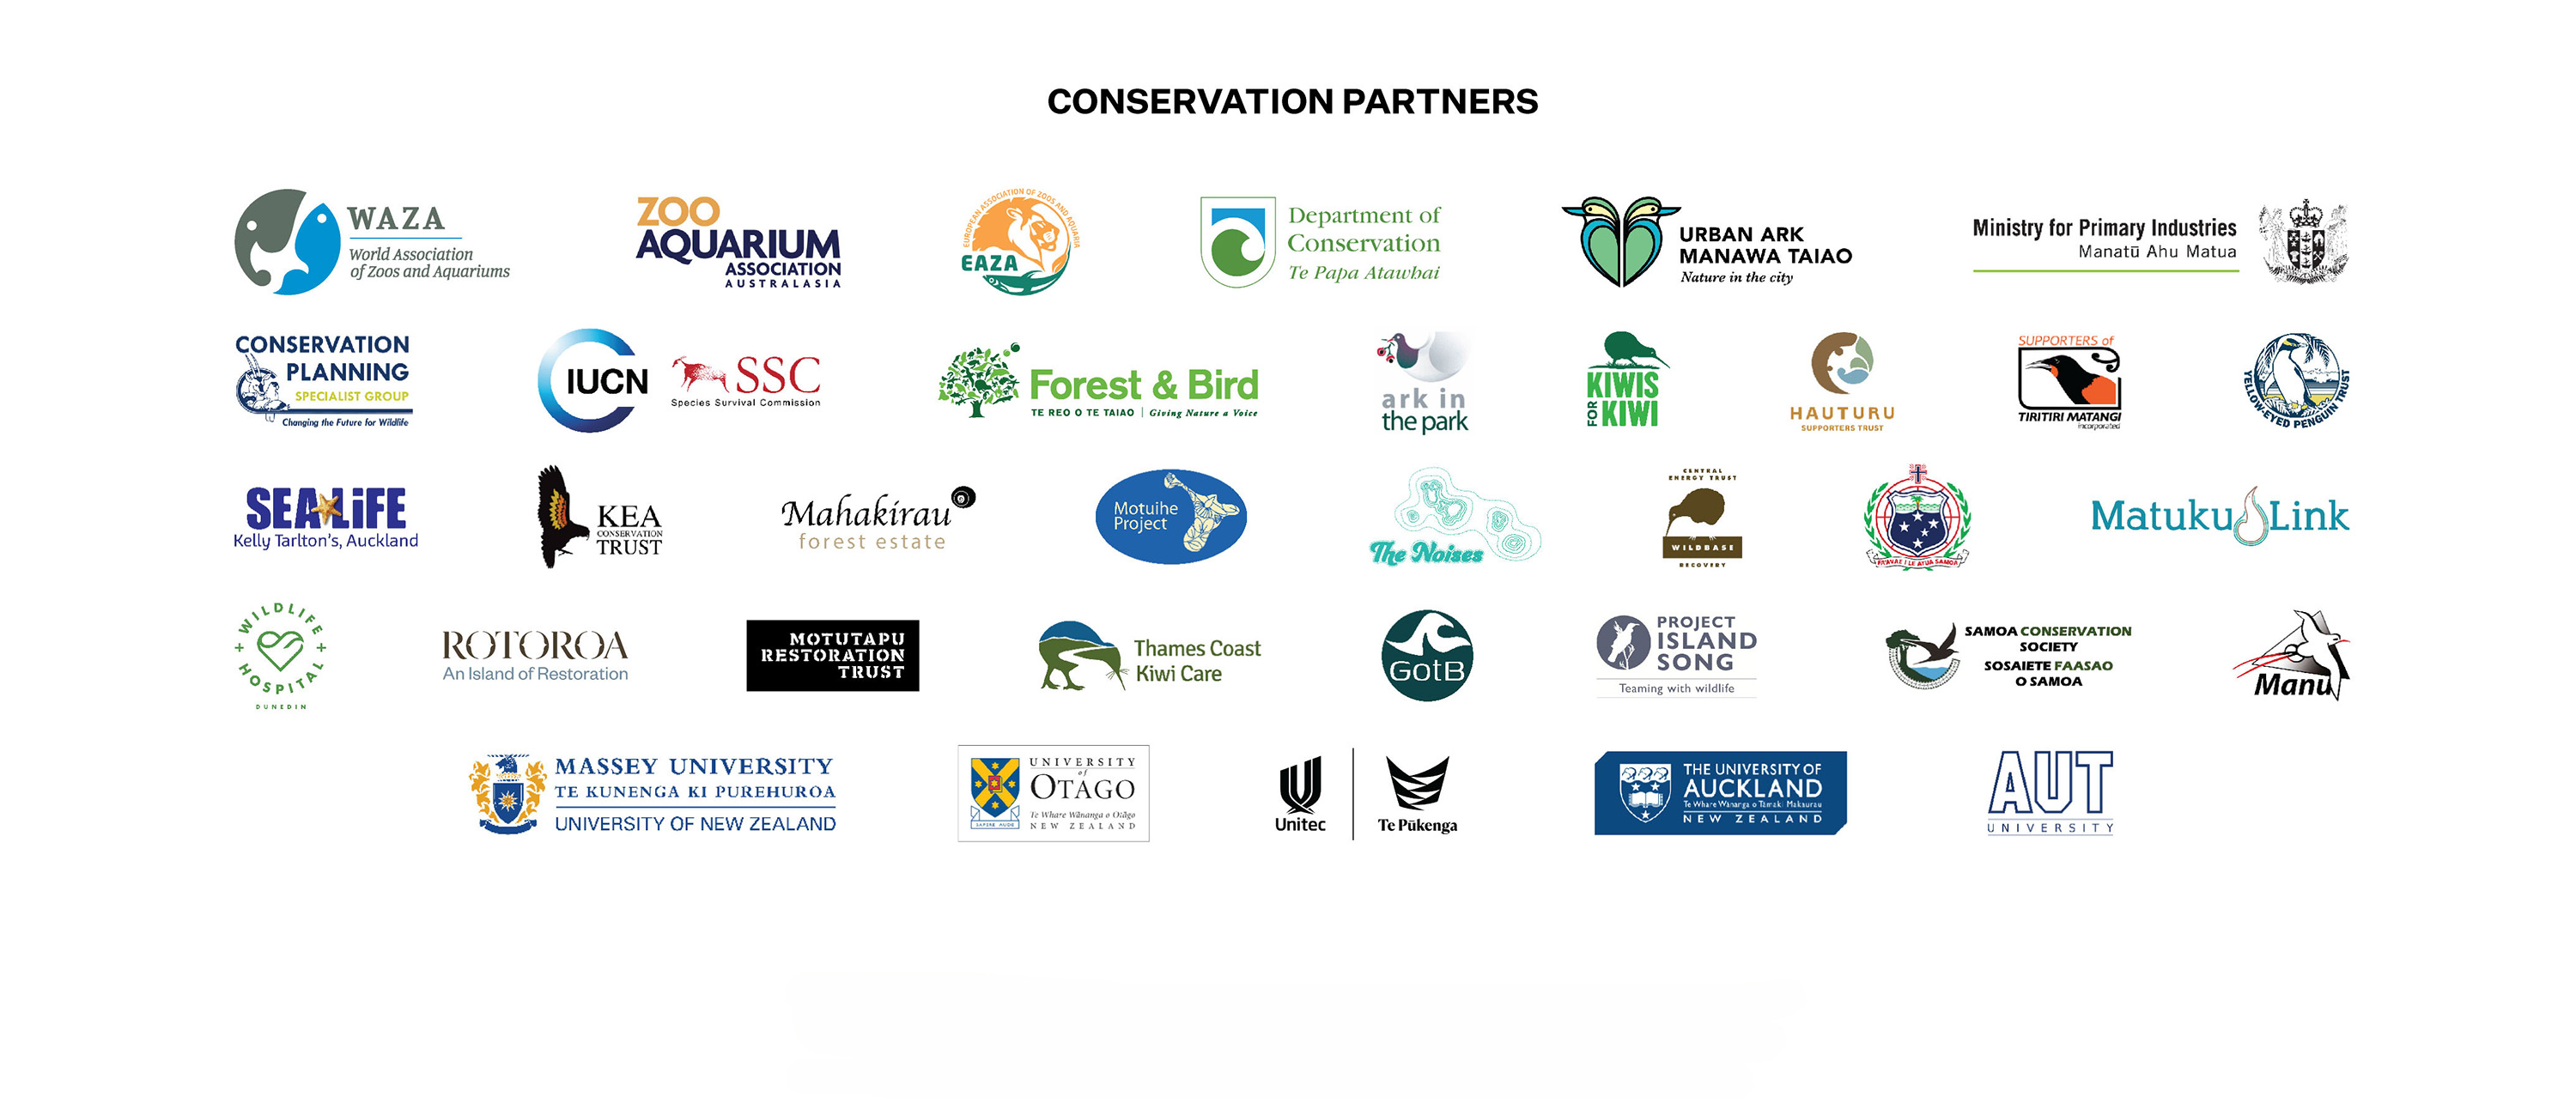 CONSERVATION PARTNERS